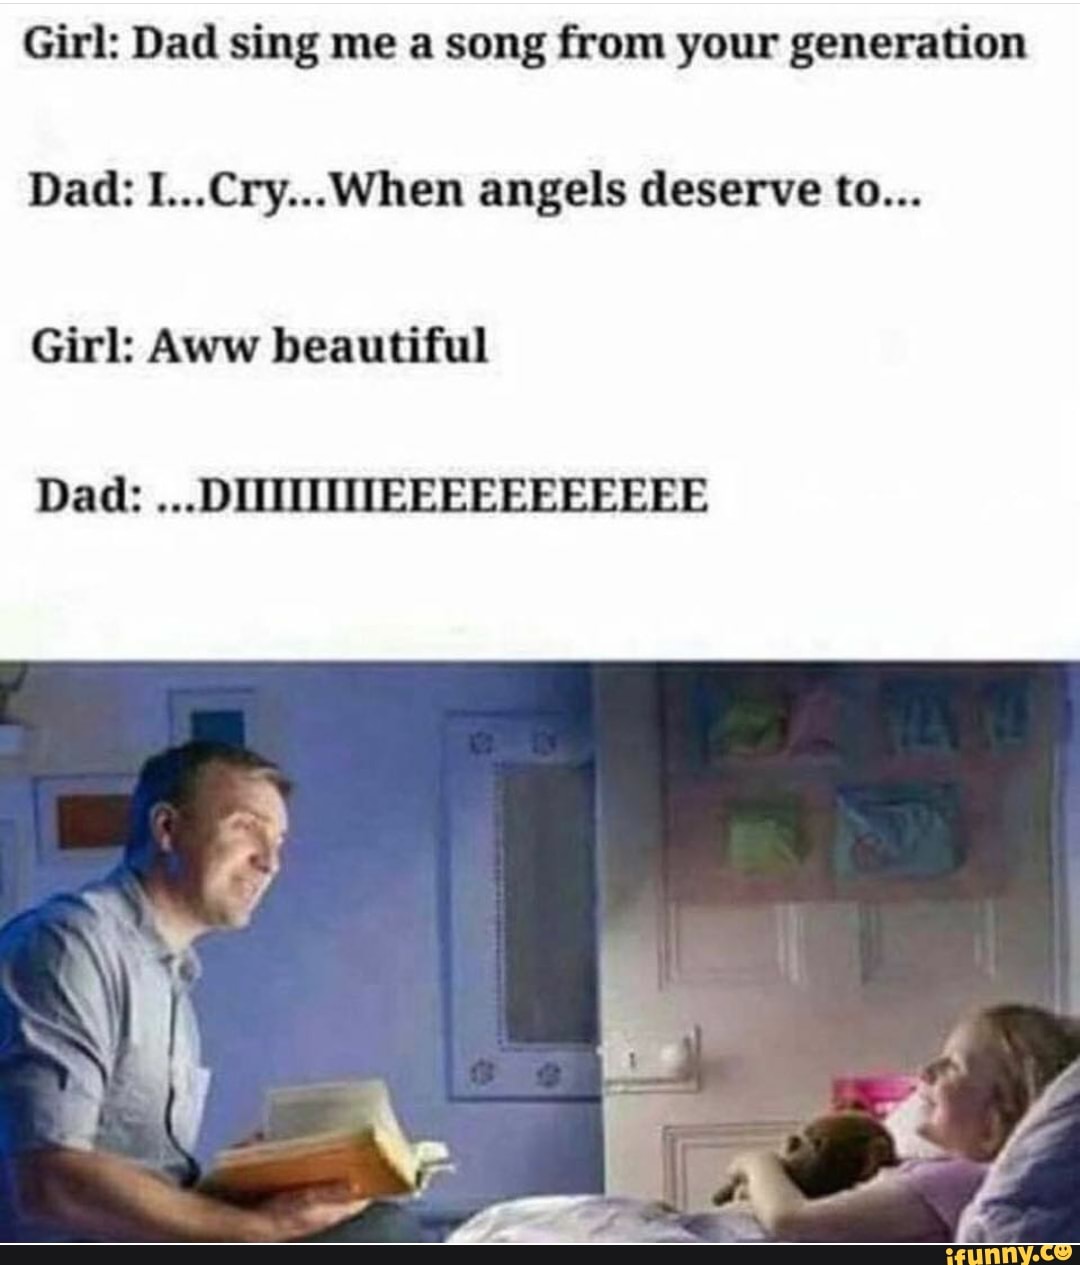 Sing фанфик. I Cry when Angels deserve to die. Dad Cry. Daddy's girl Мем. System of a down Angels deserve to die.